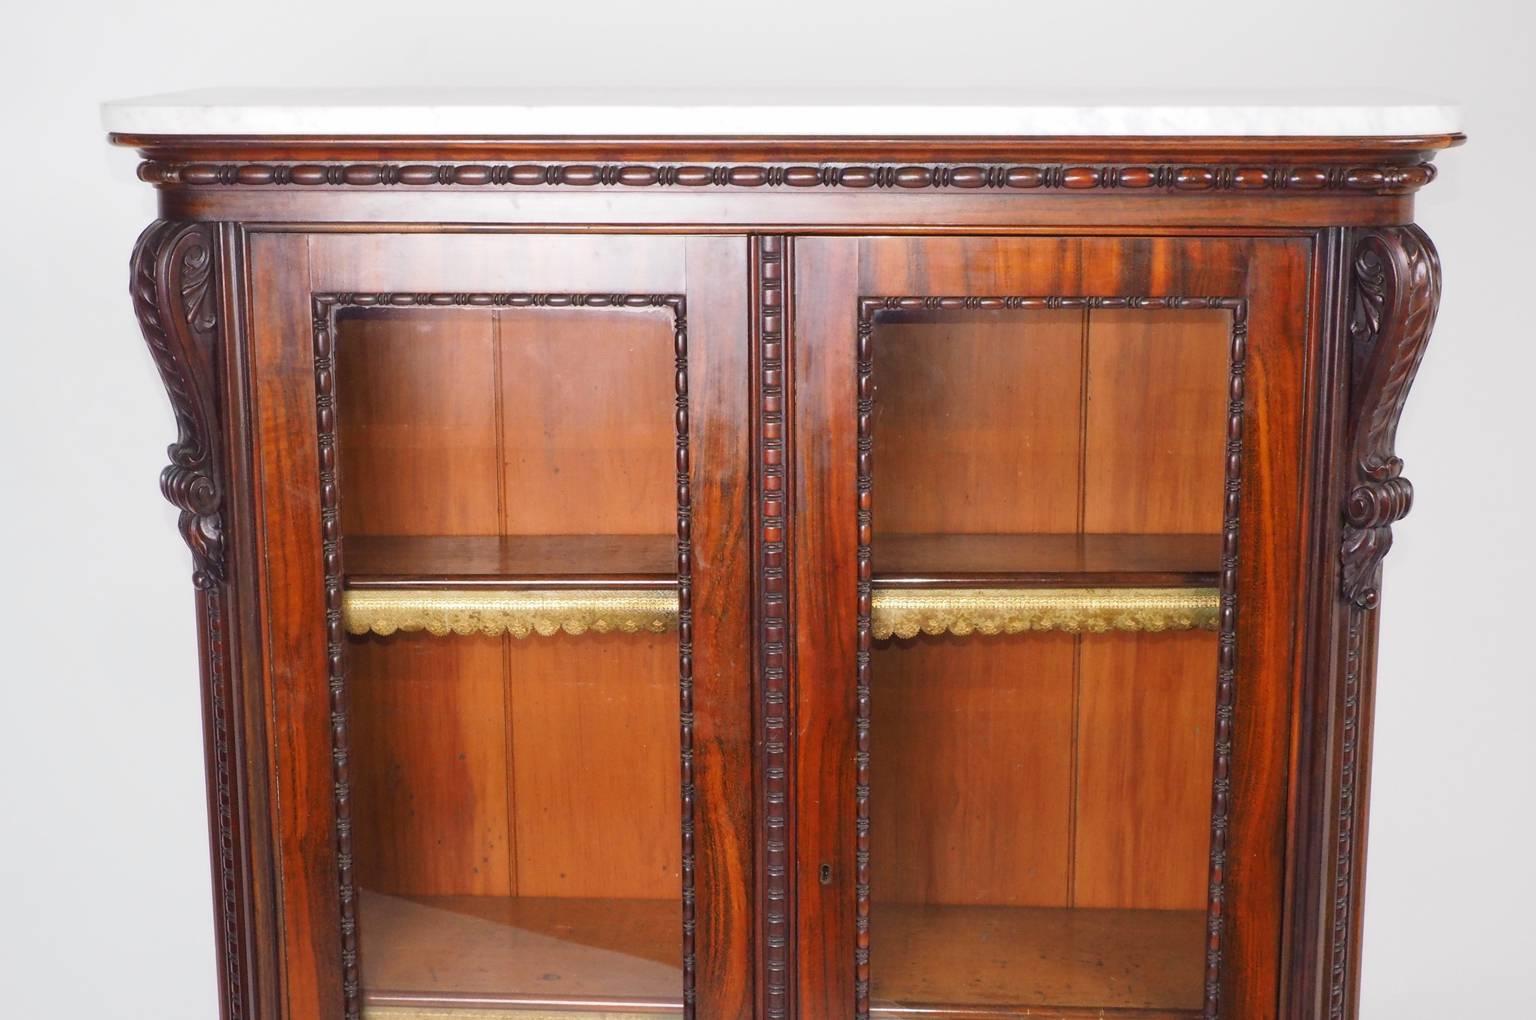 Regency Small Bookcase or Display Cabinet in Goncalo Alves For Sale